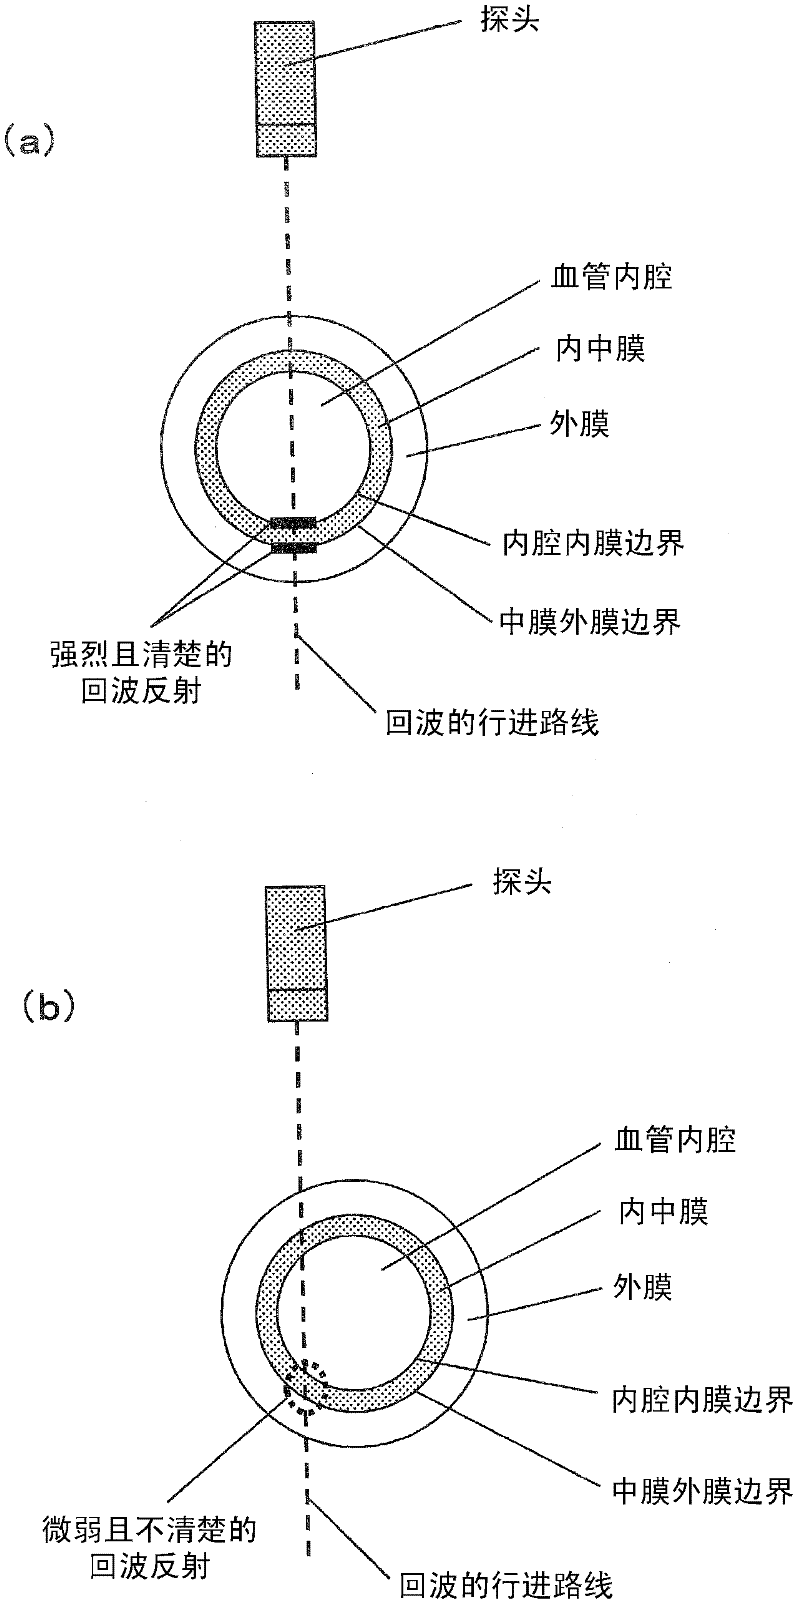 Ultrasonic diagnostic device, and method for measuring intima-media complex thickness